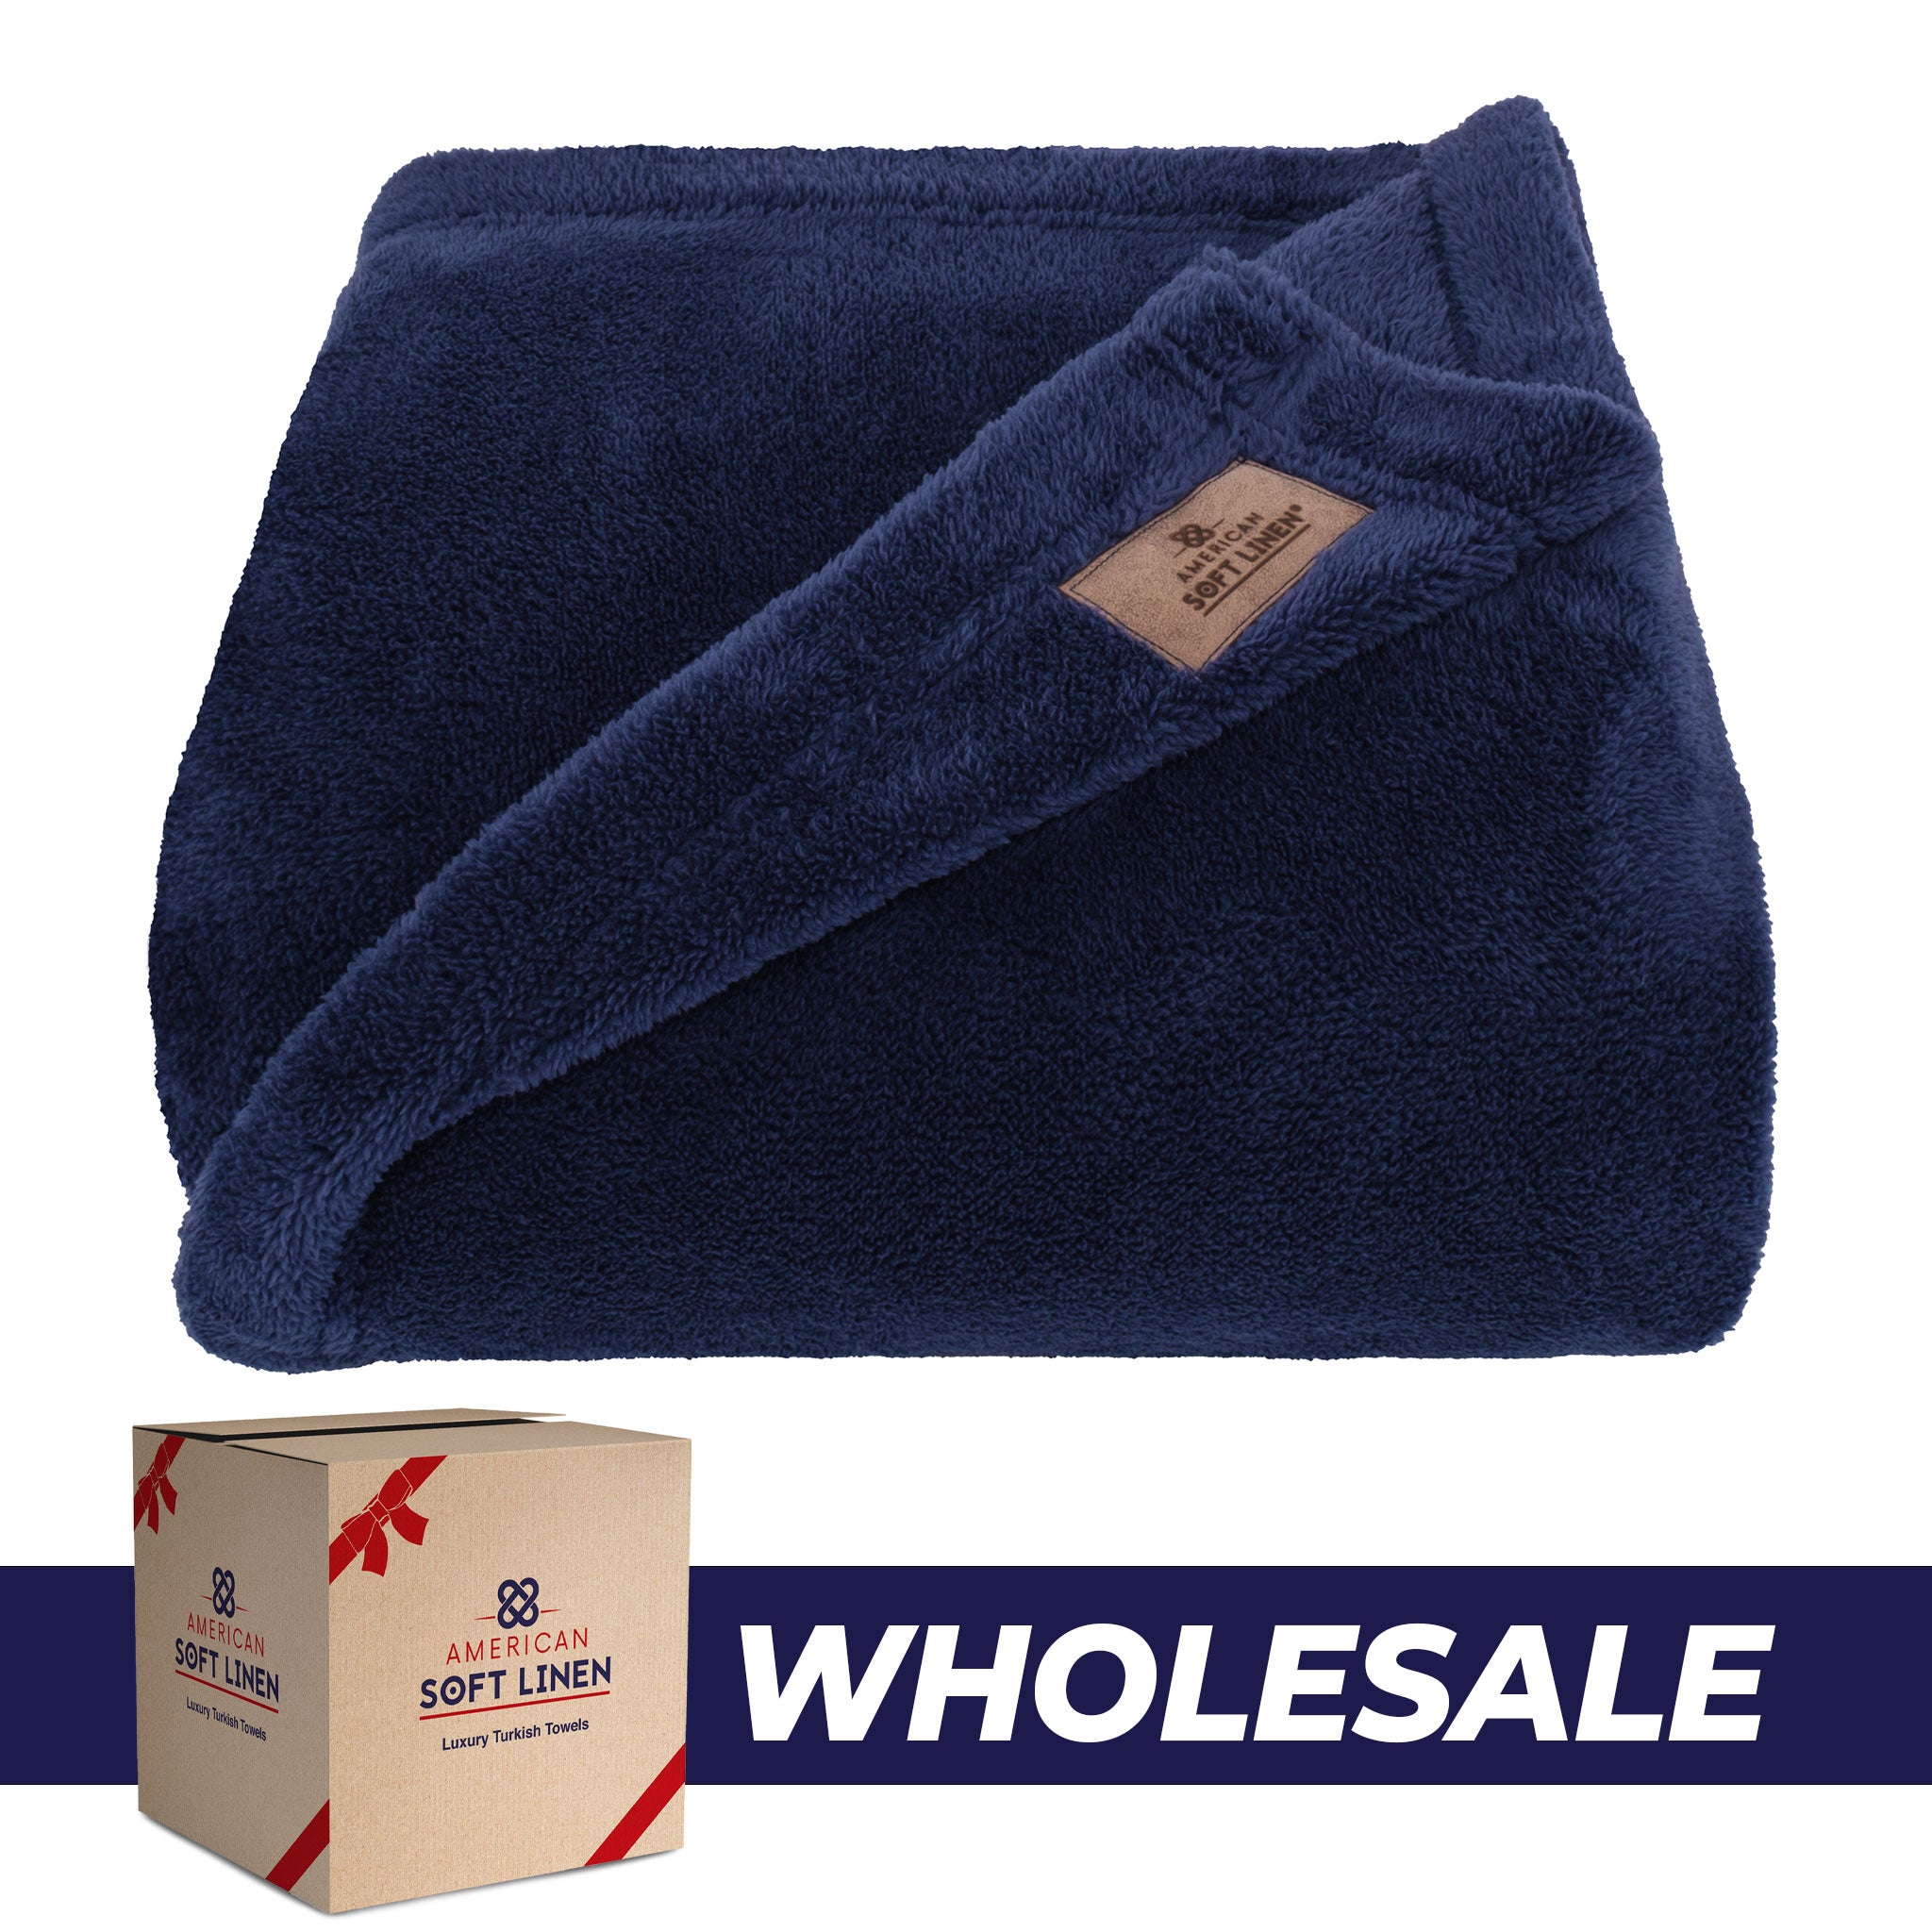 American Soft Linen - Bedding Fleece Blanket - Wholesale - 15 Set Case Pack - Twin Size 60x80 inches - Navy-Blue - 0